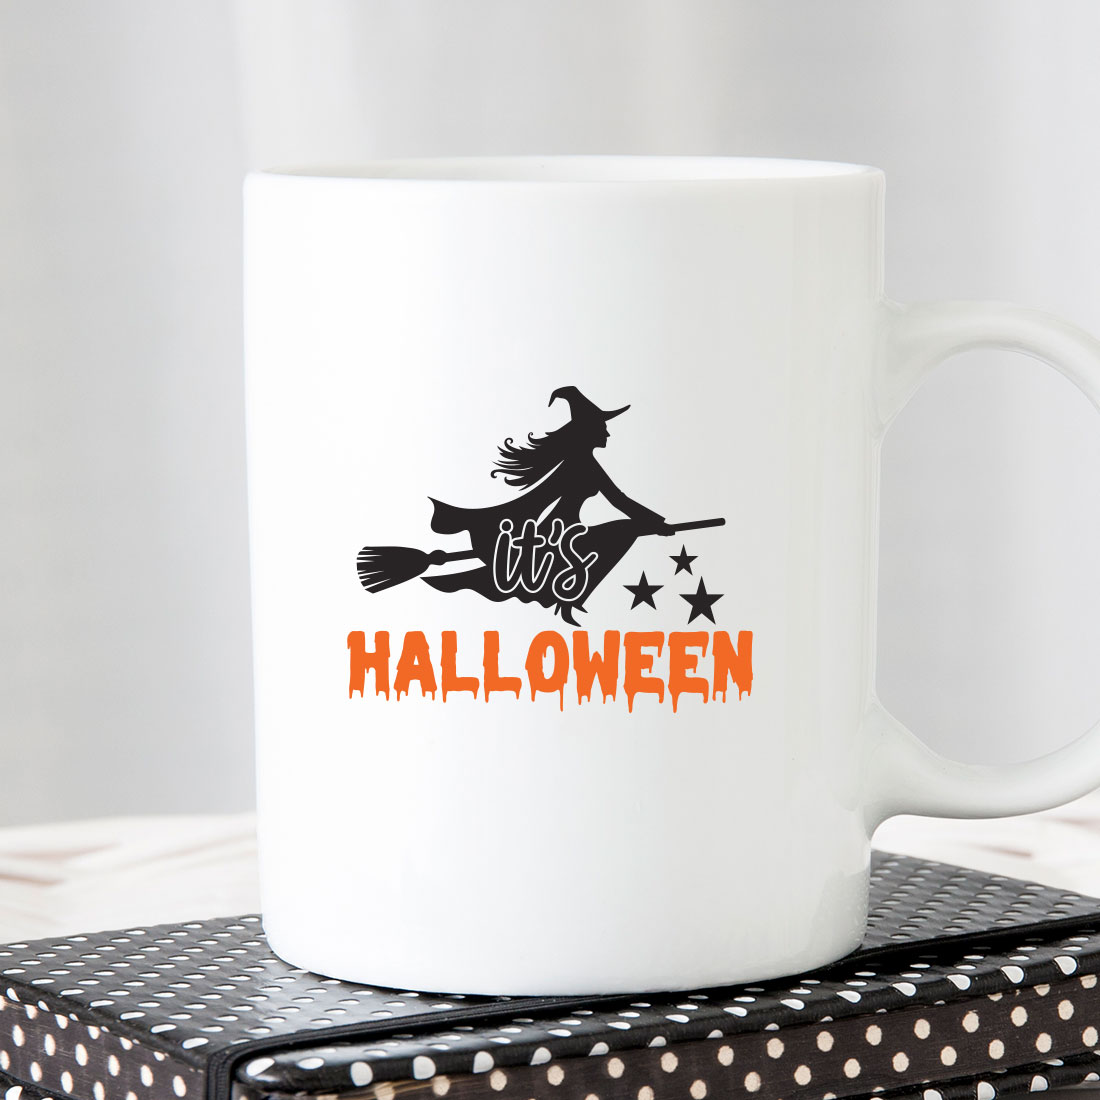 White coffee mug with a witch on it.